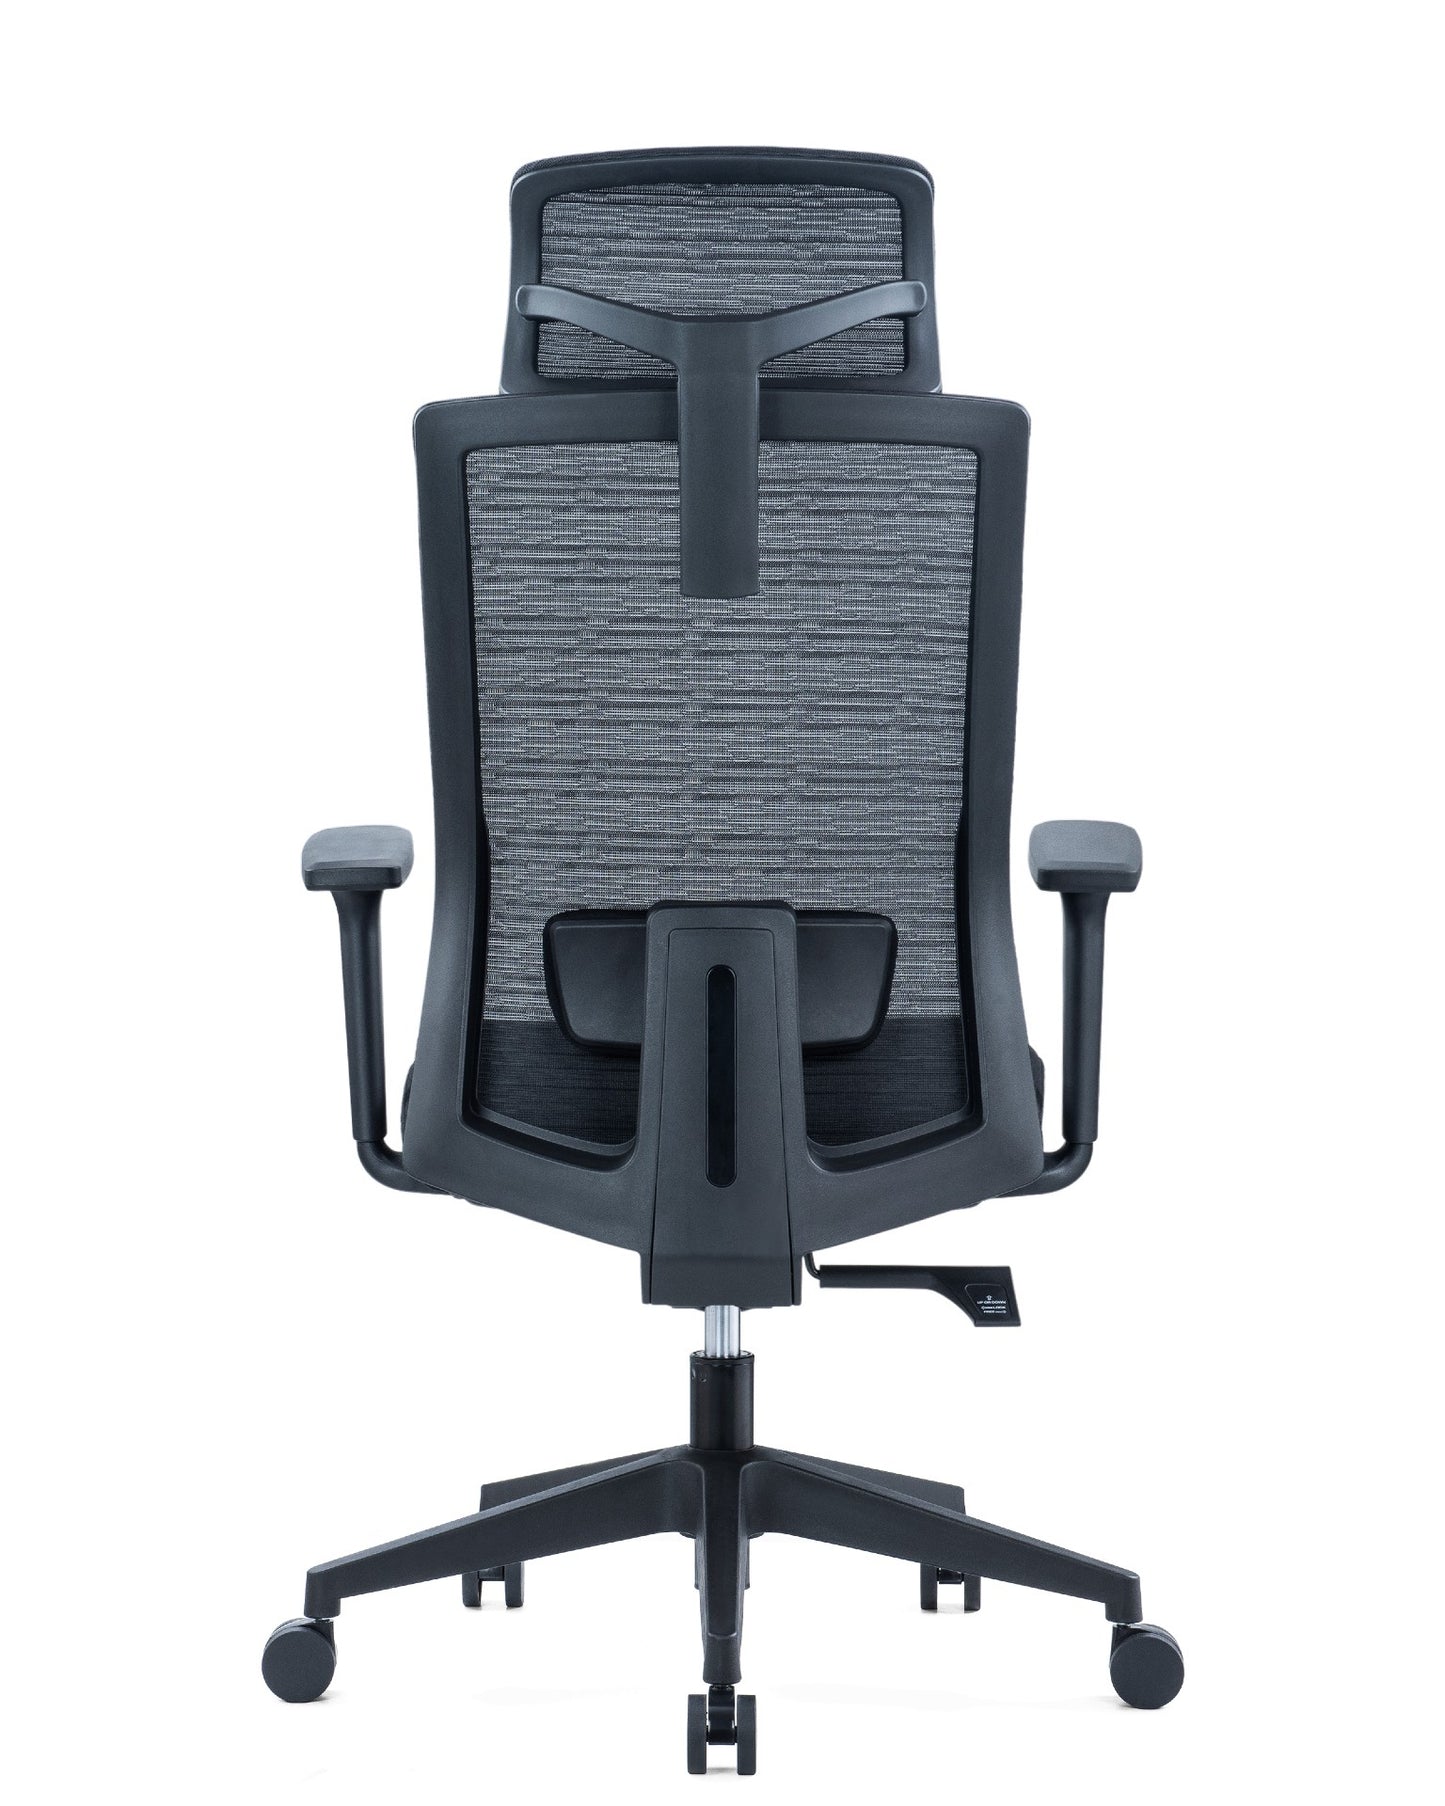 Molded Foam Seat Professional Working Chair